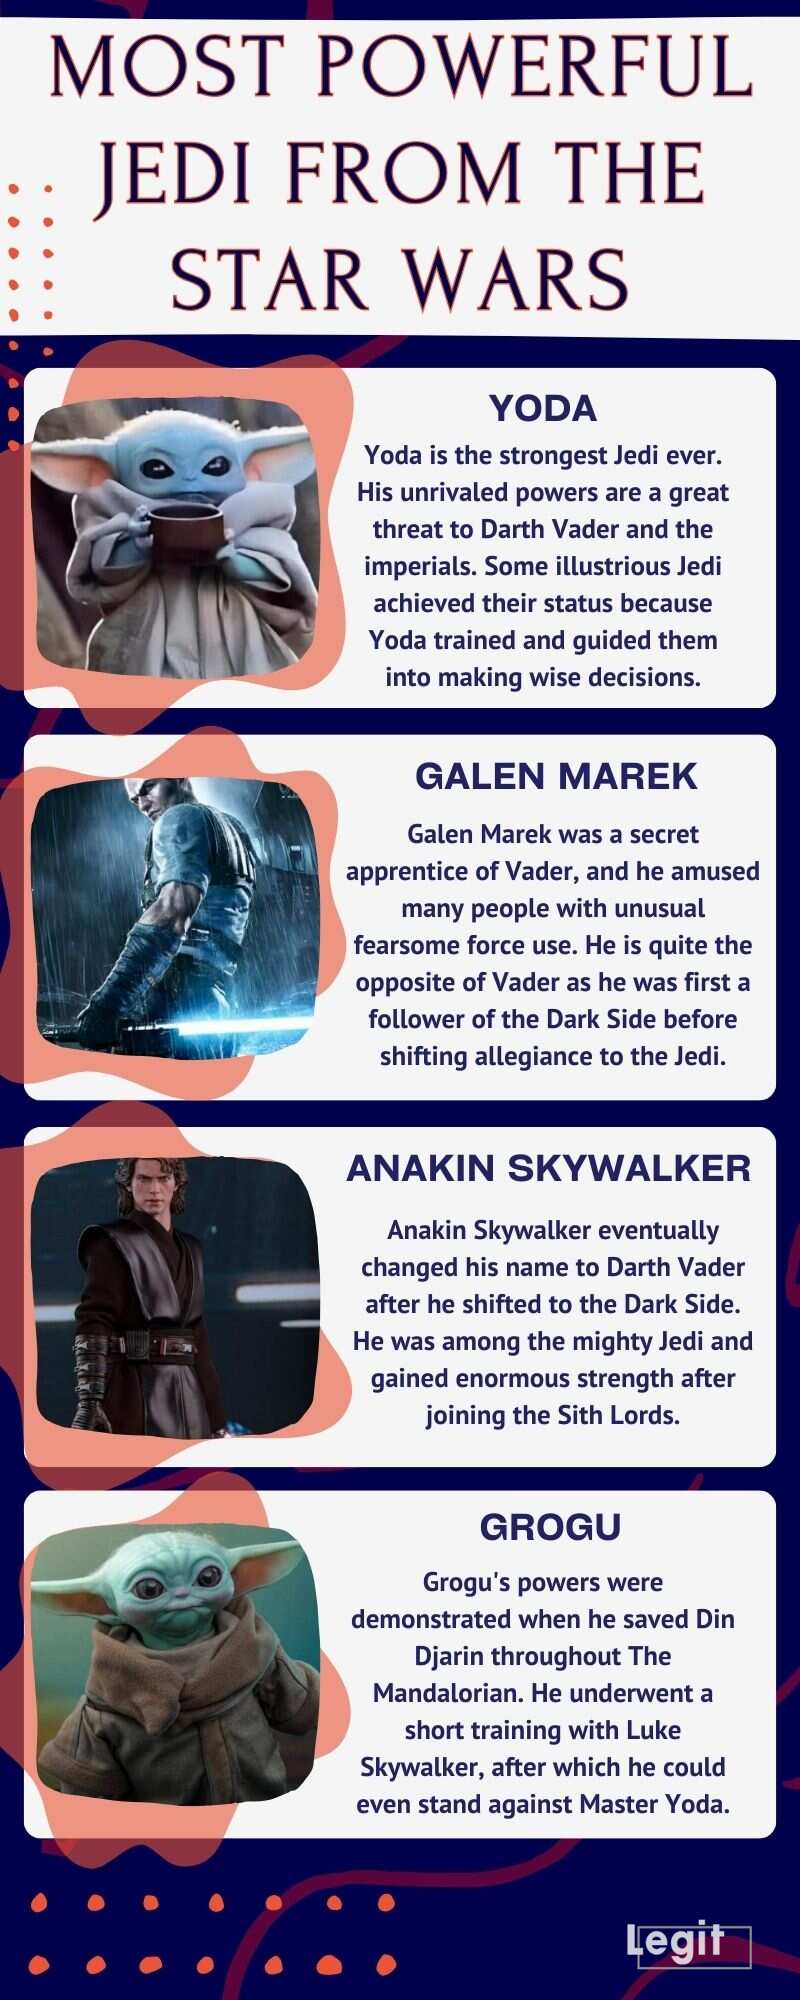 Most powerful Jedi from the Star Wars